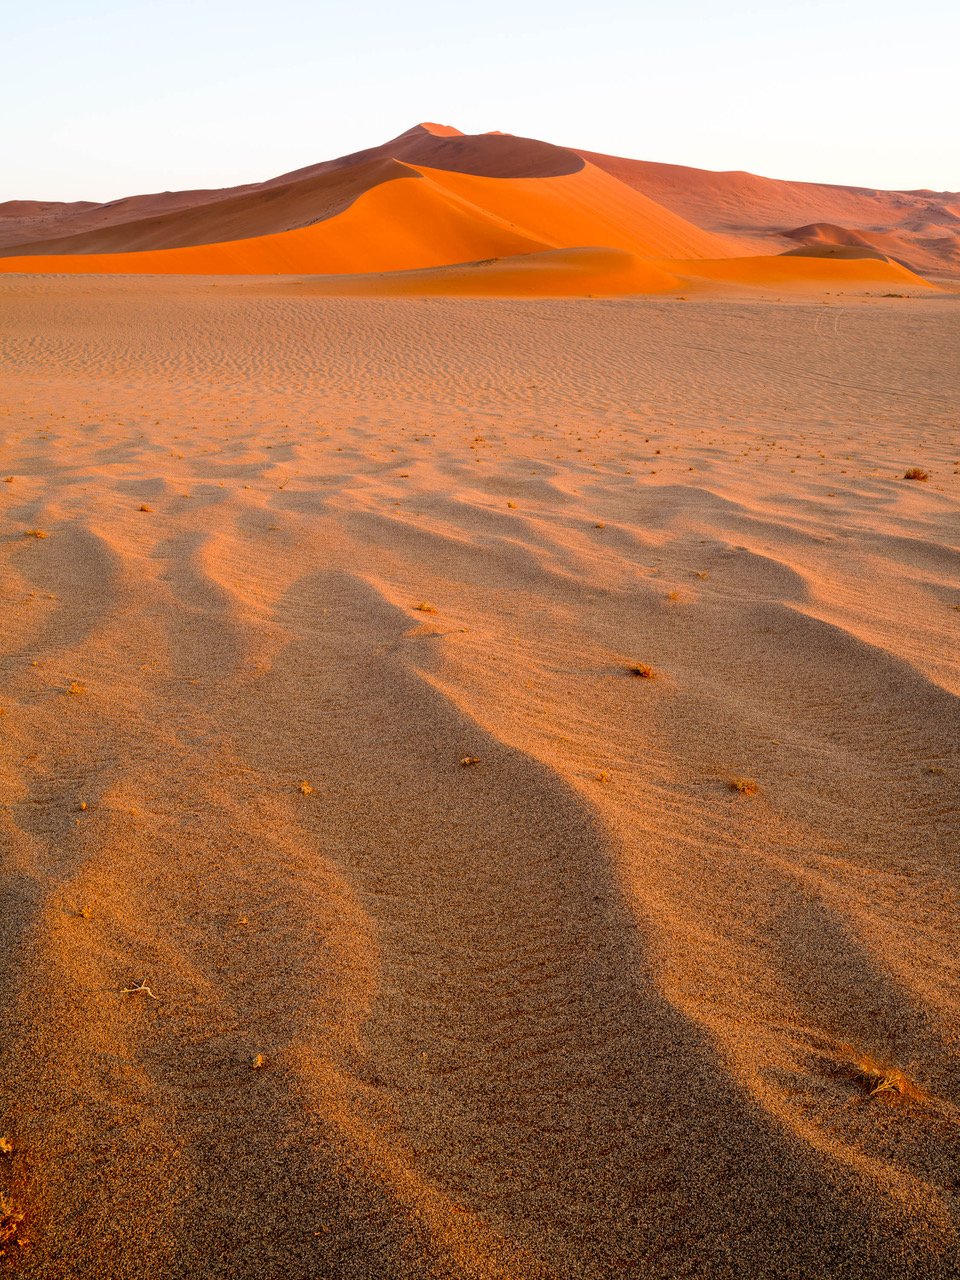 Desert with wavy sand, Namibia #7, Africa